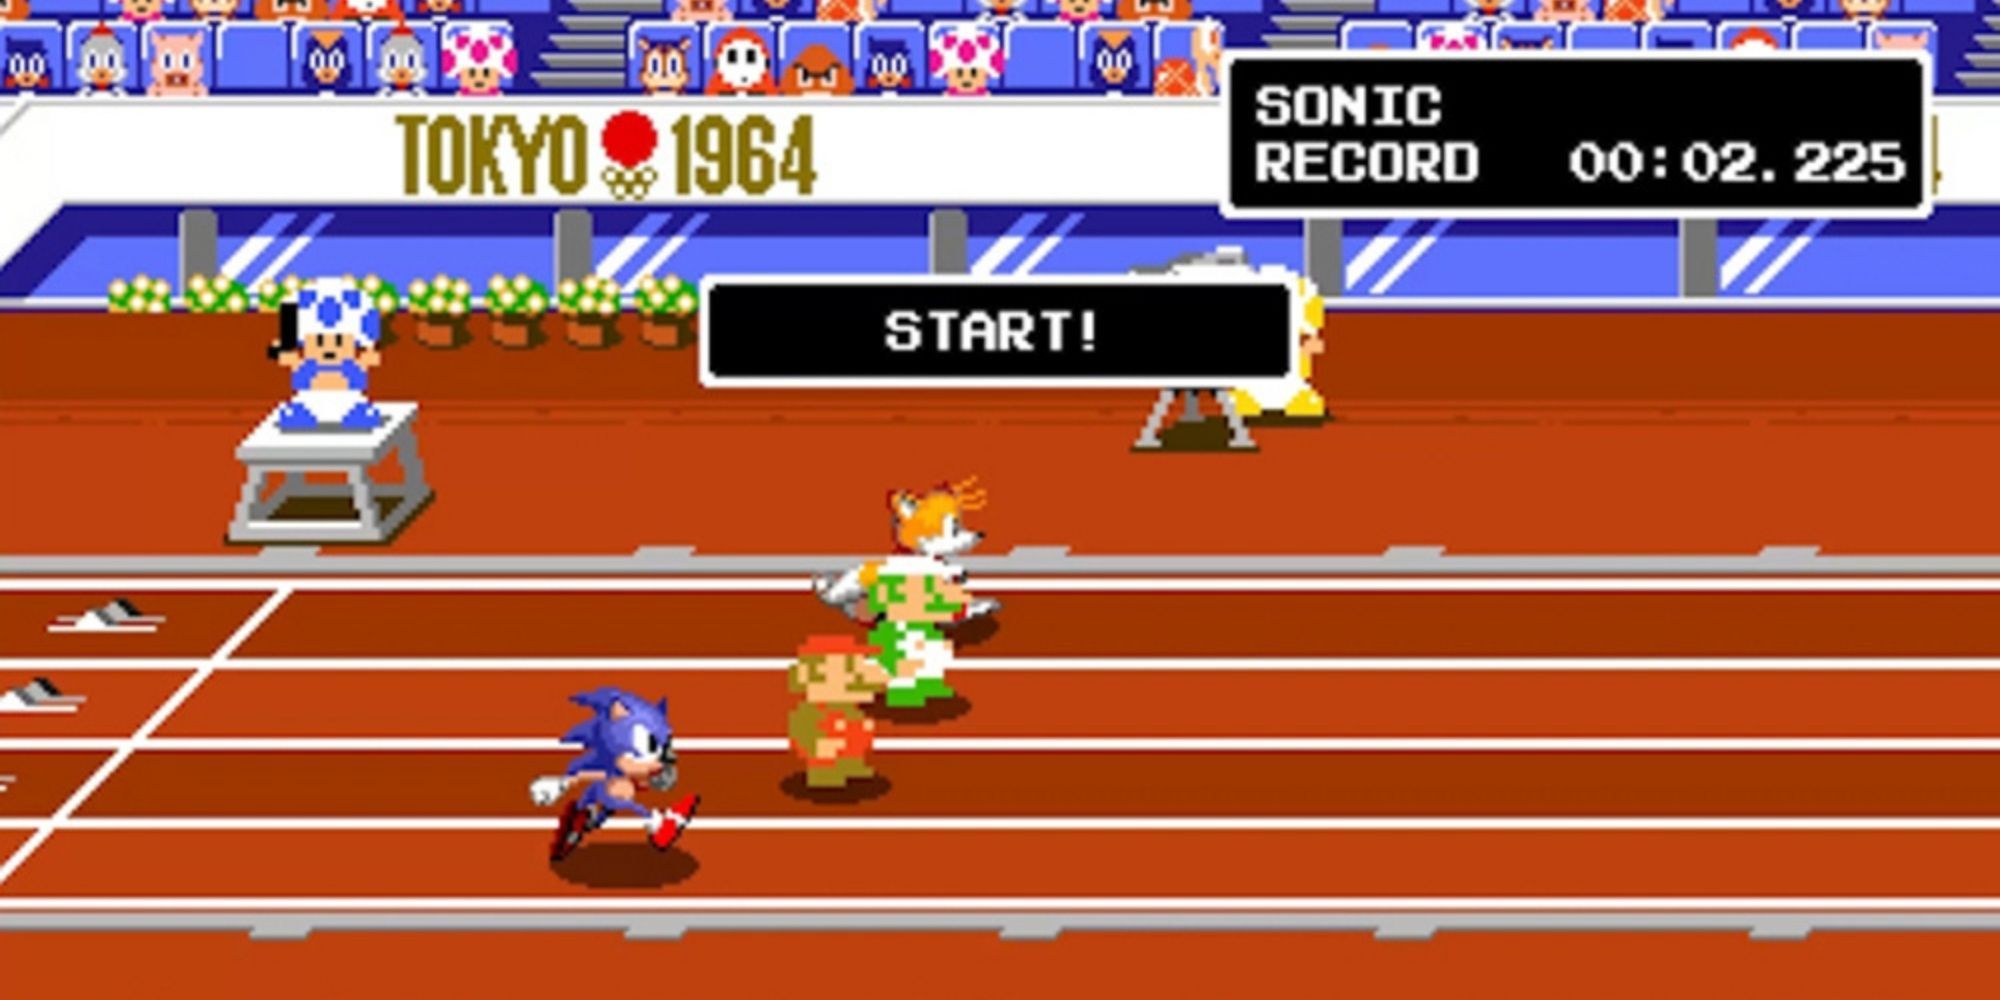 8 and 16 bit Sonic, Mario, Luigi, Tails race in a sprint